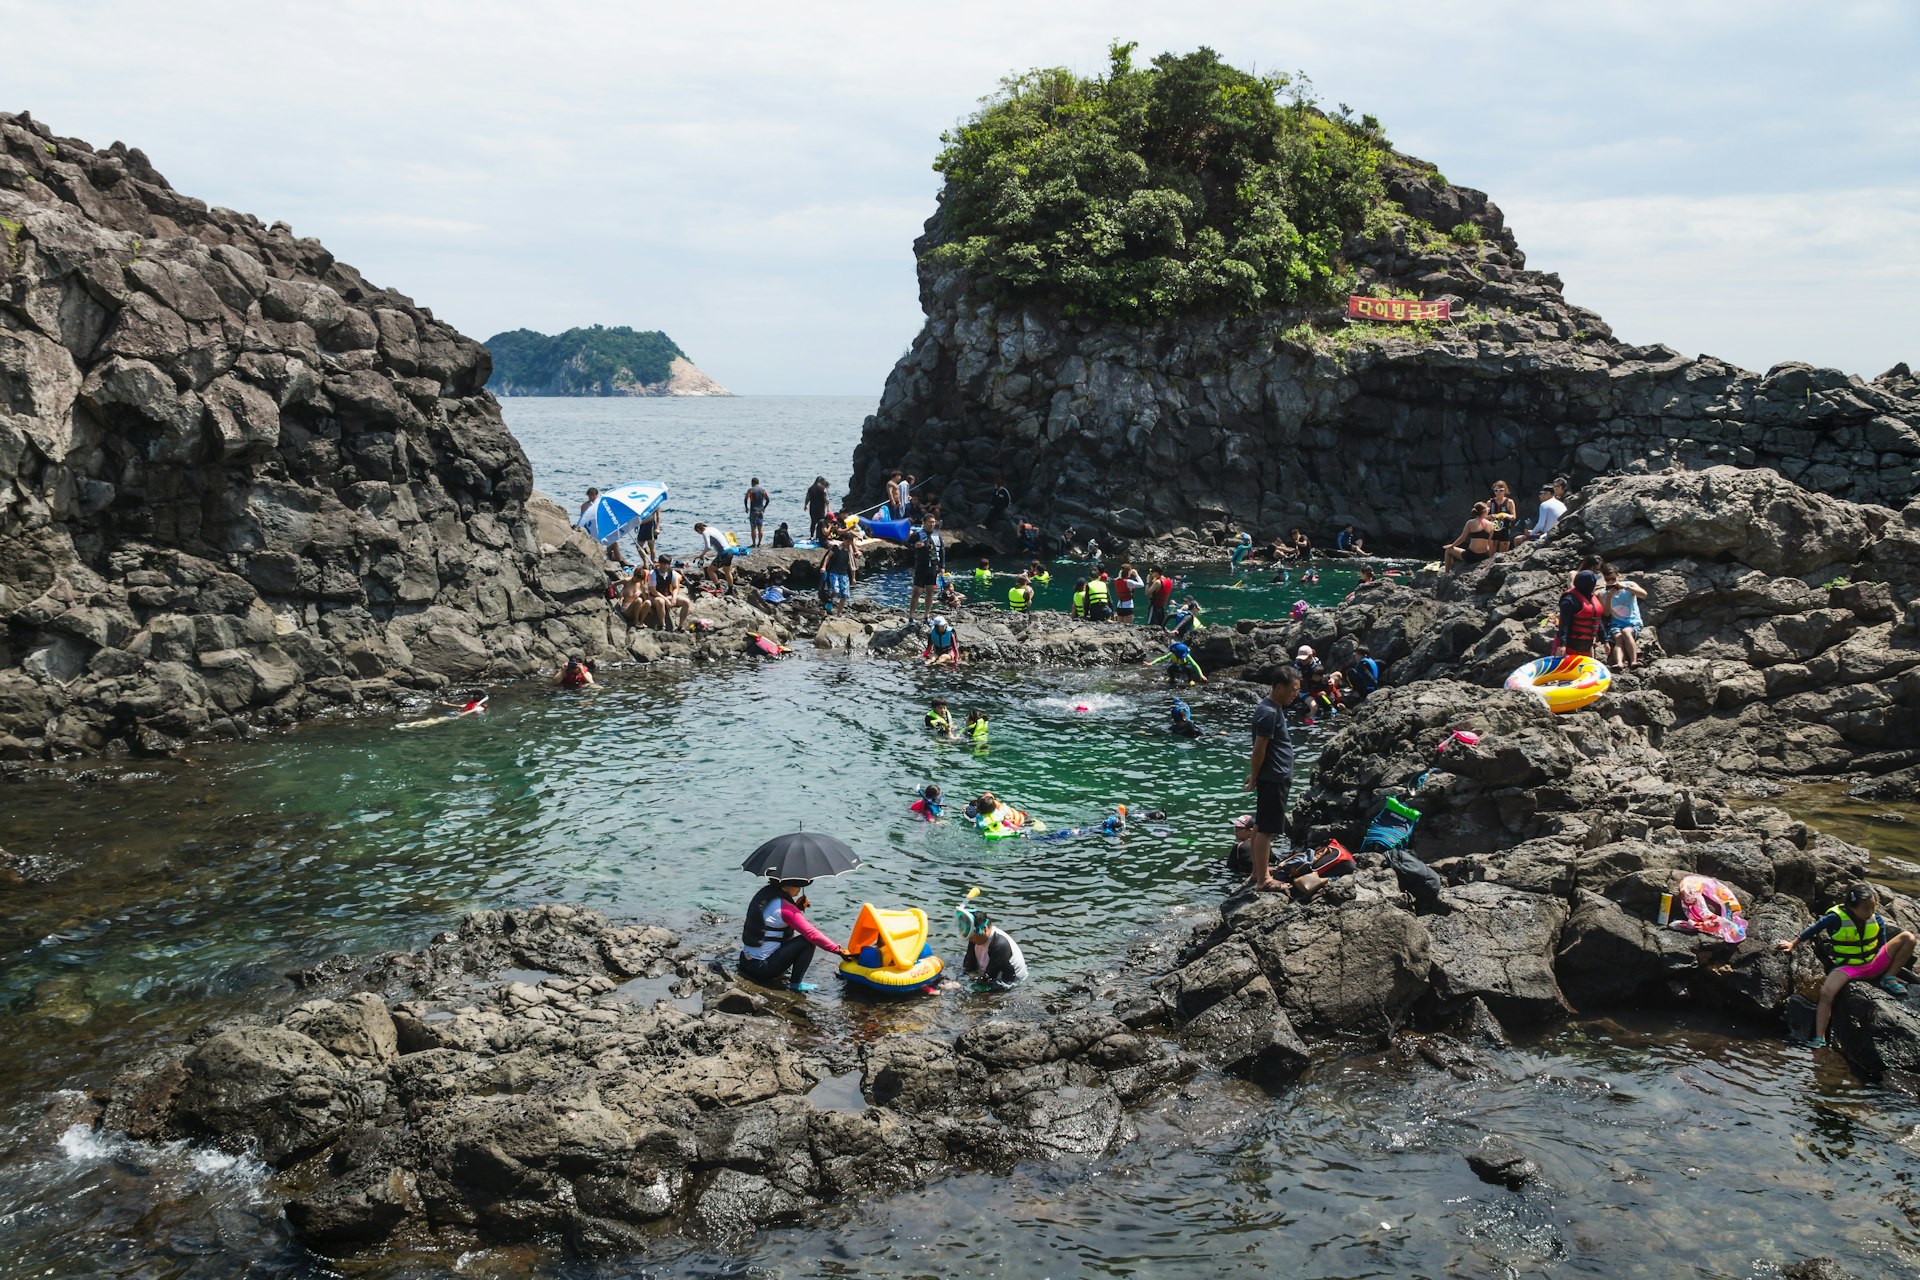 Natural Pool with a crowd of tourists and locals swimming.